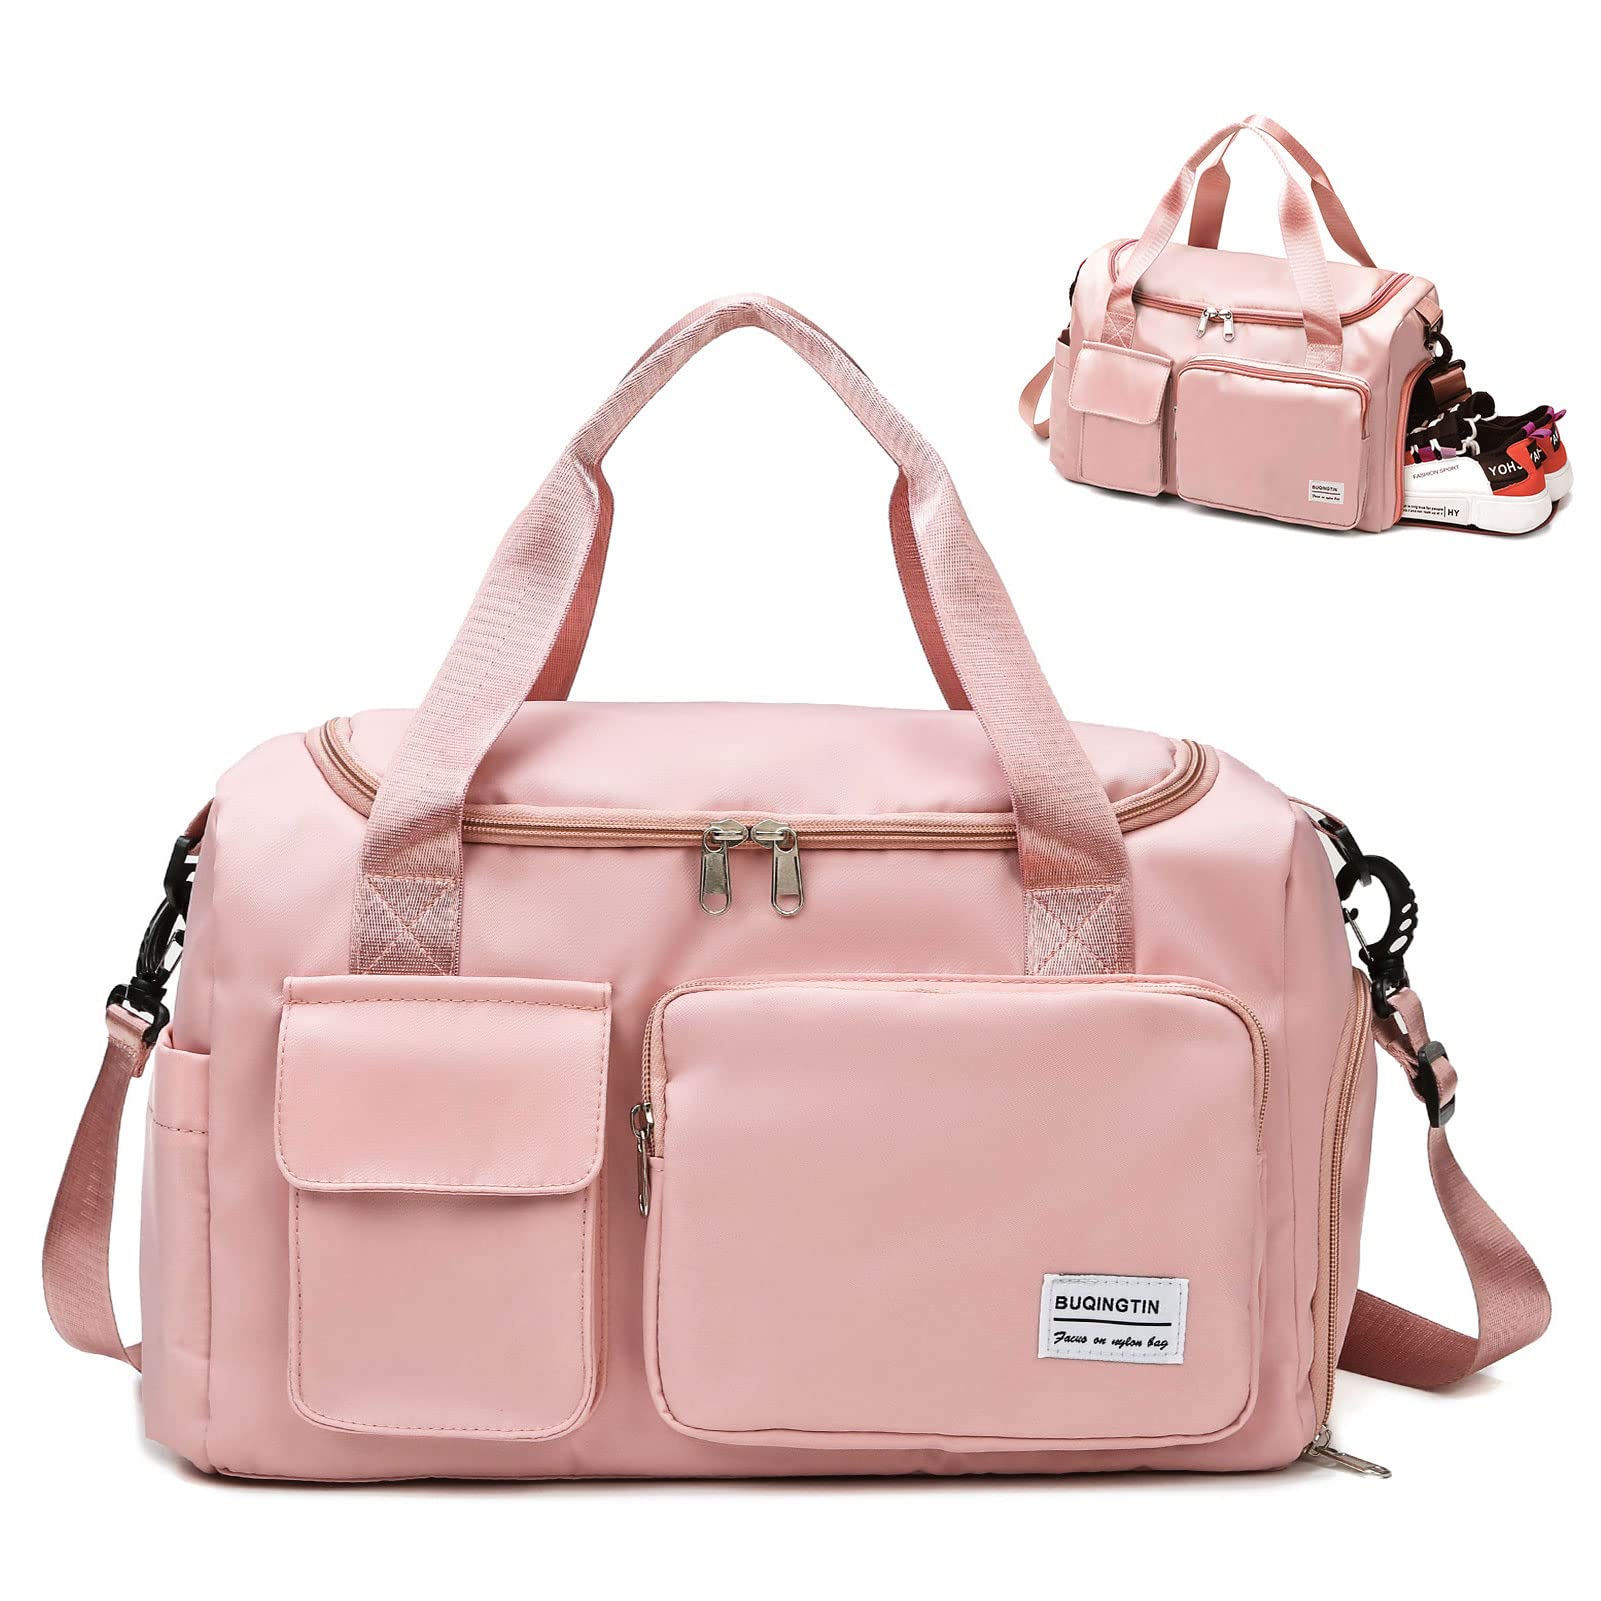 Pink Gym Bag With Shoe Compartment